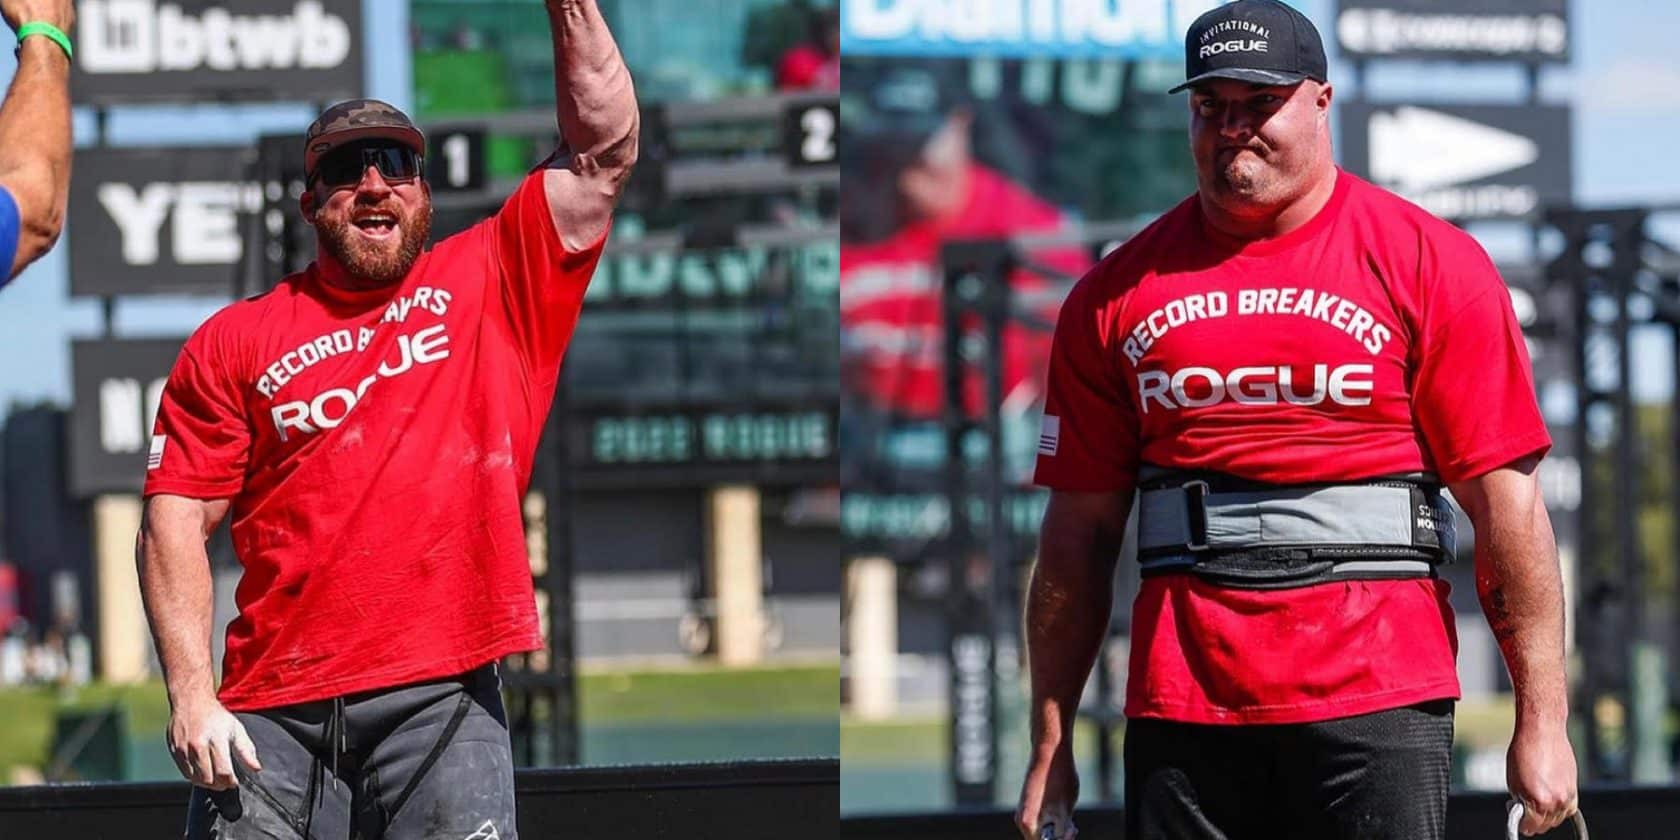 Mitchell Hooper And Kevin Faires Set New Strongman World Records At The